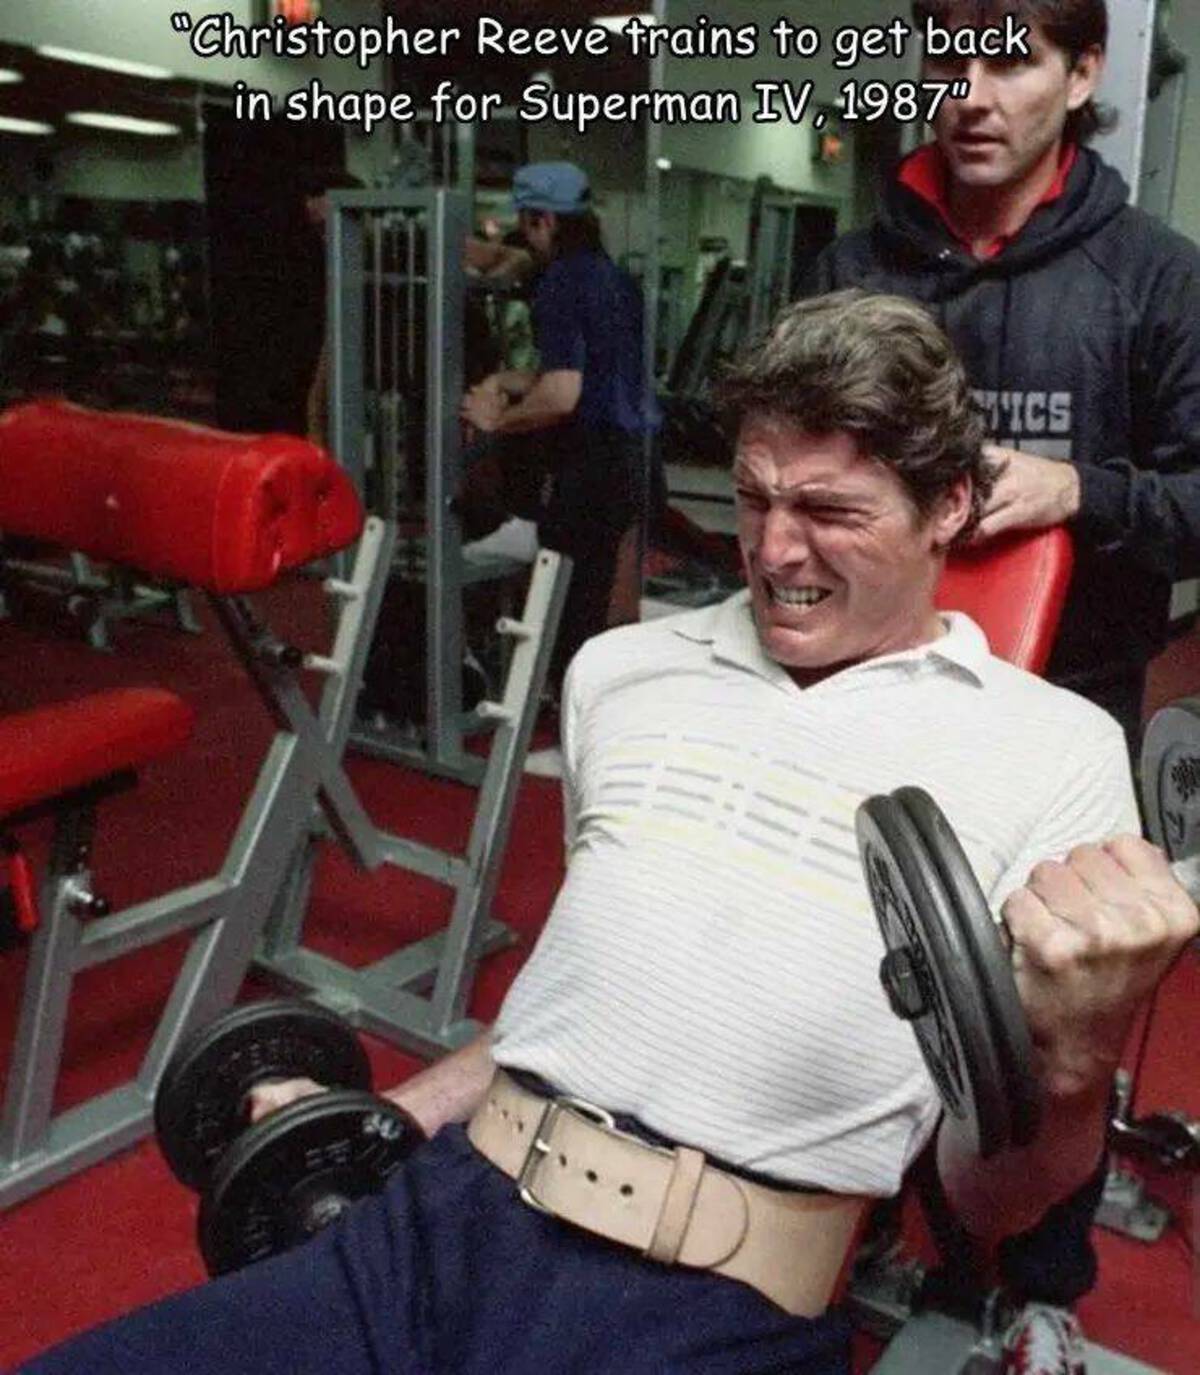 strength training - "Christopher Reeve trains to get back in shape for Superman Iv, 1987" Mics